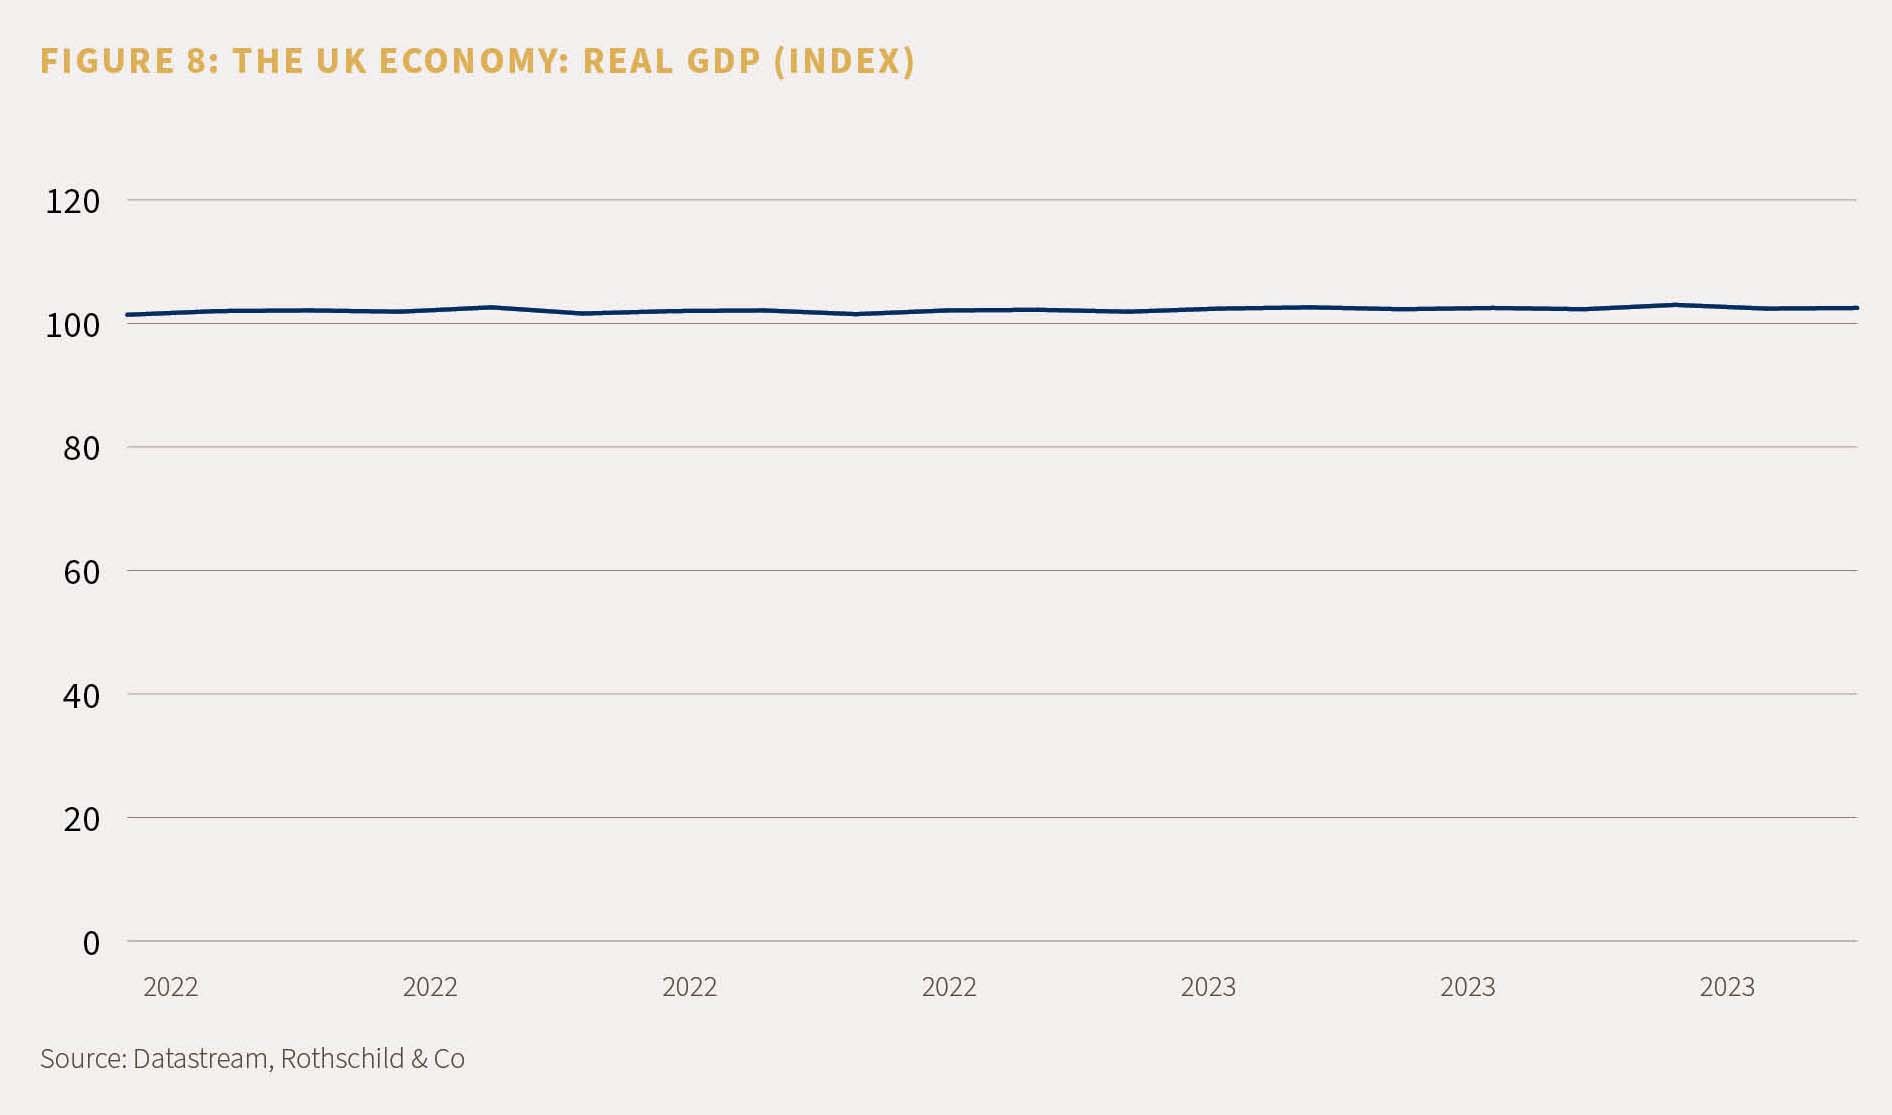 A chart to show the real GDP (Index) of the UK economy.